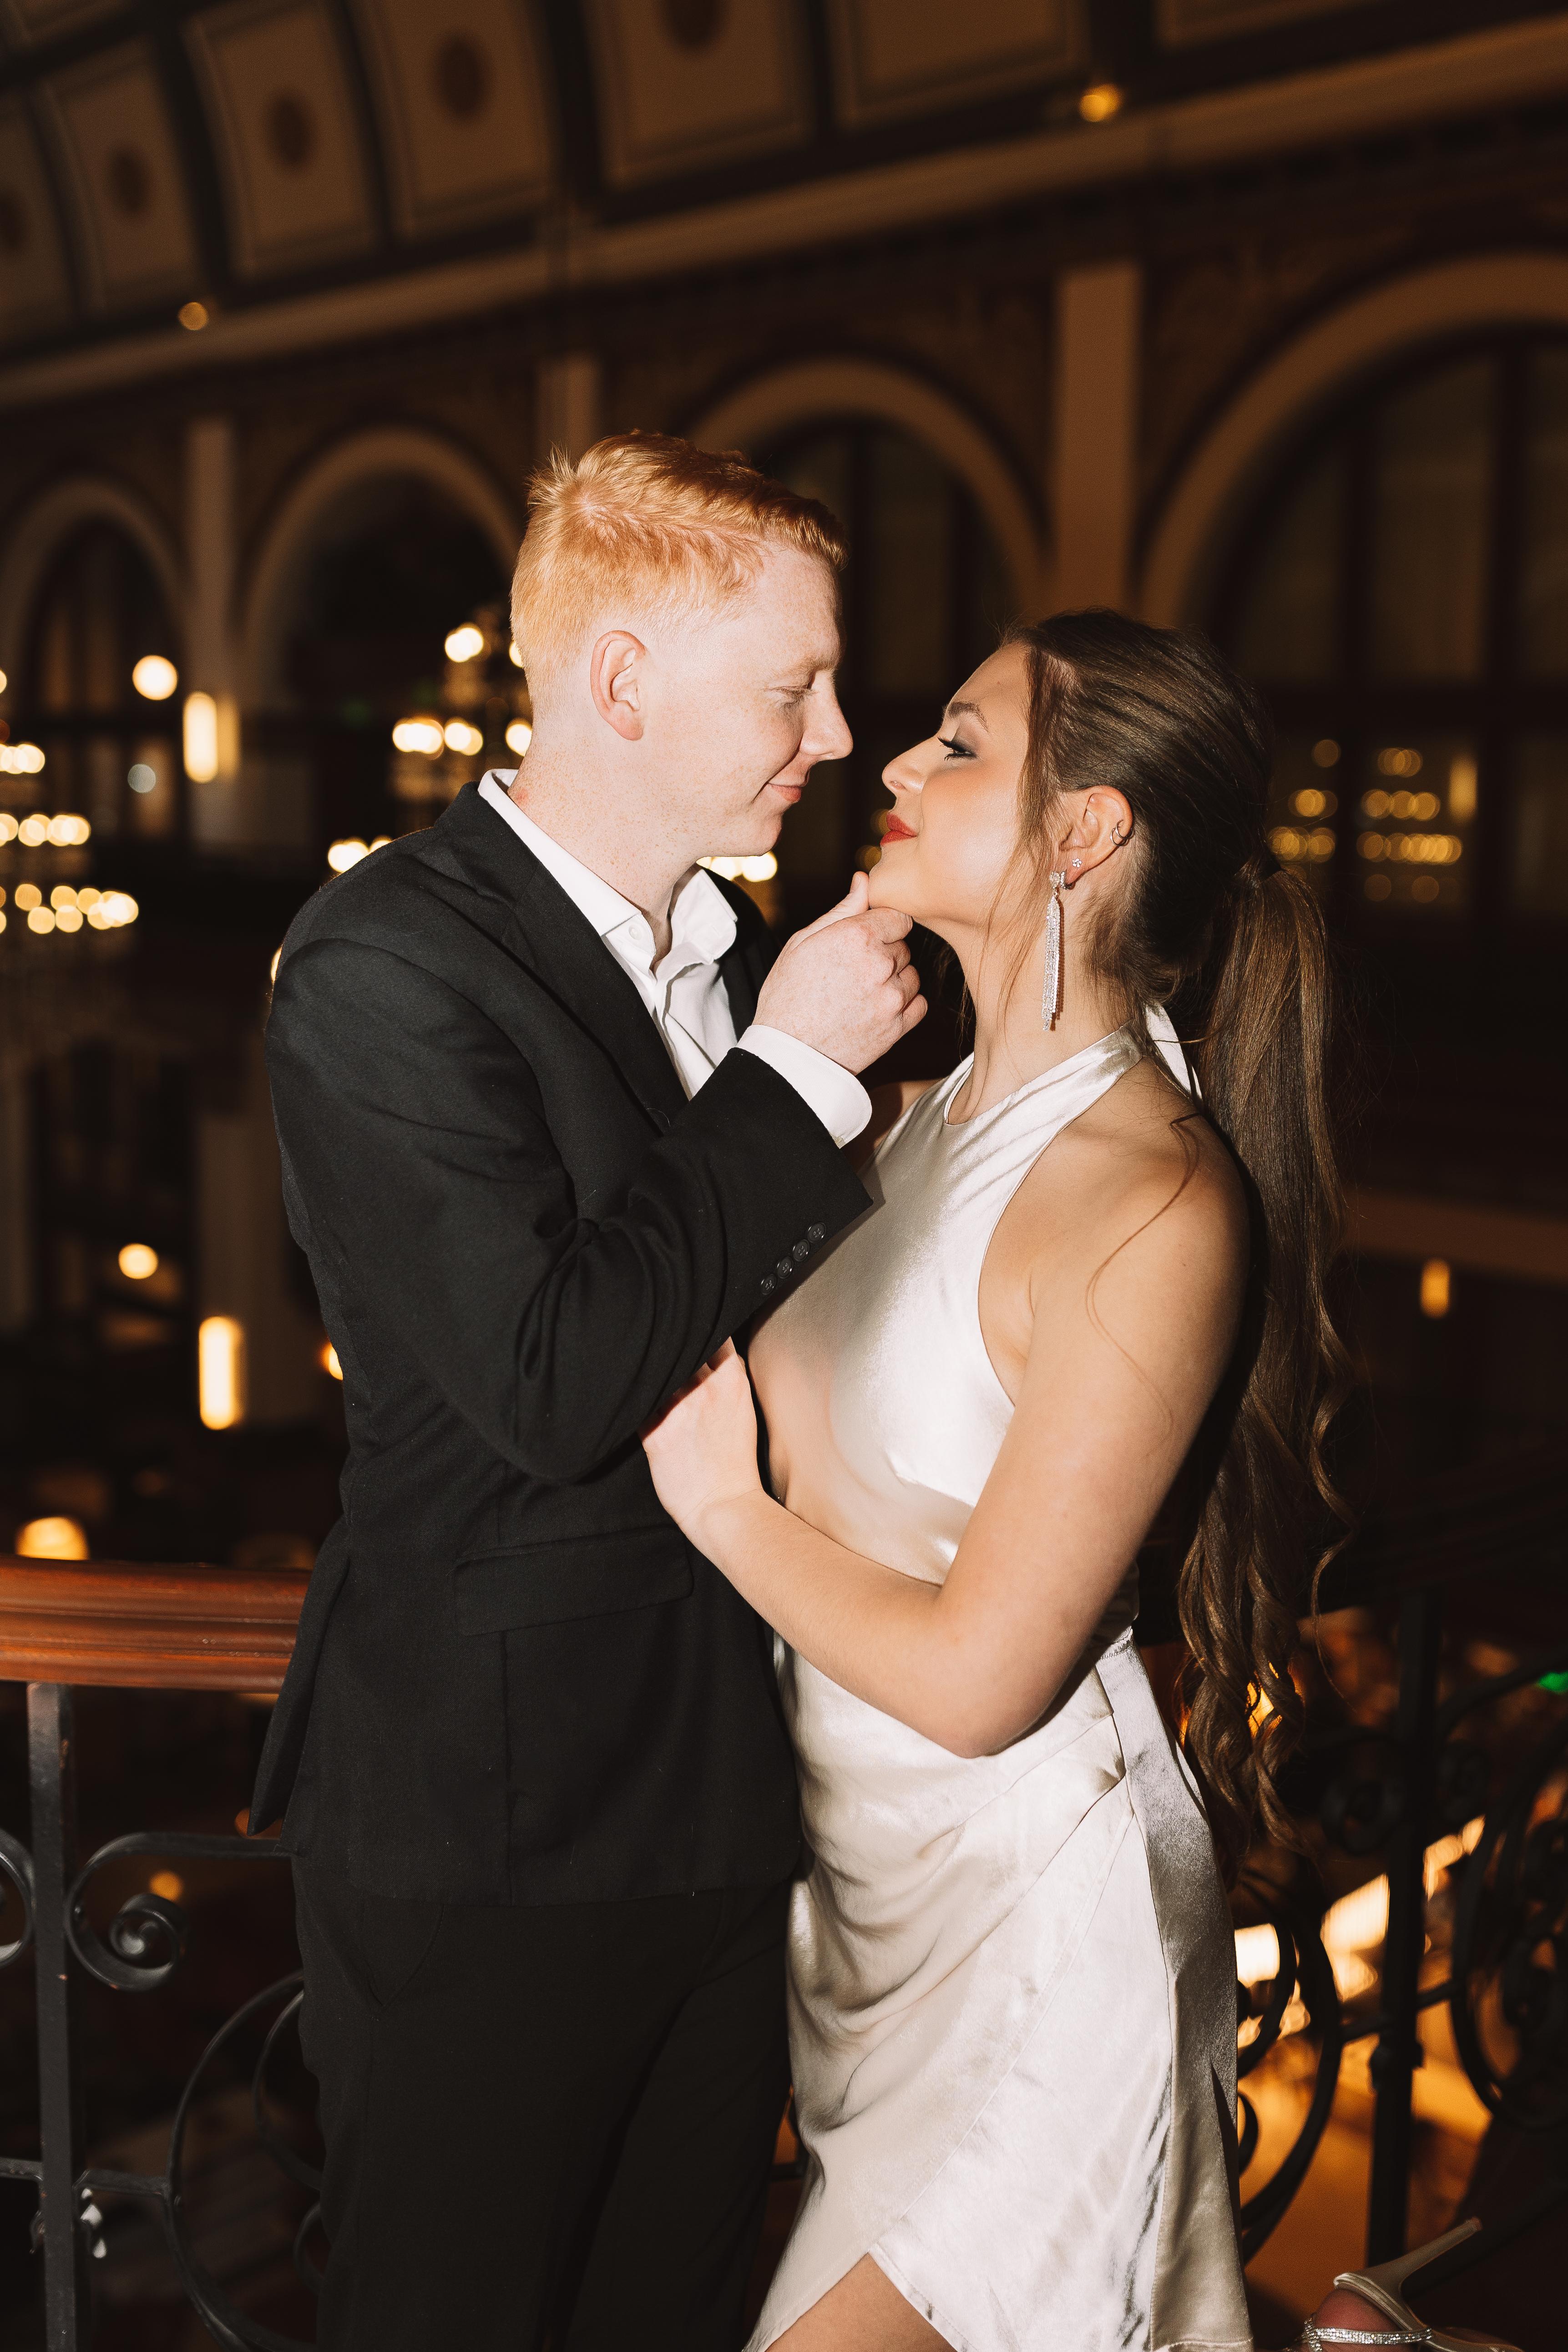 The Wedding Website of Taylor Cutler and Tyler Grassi